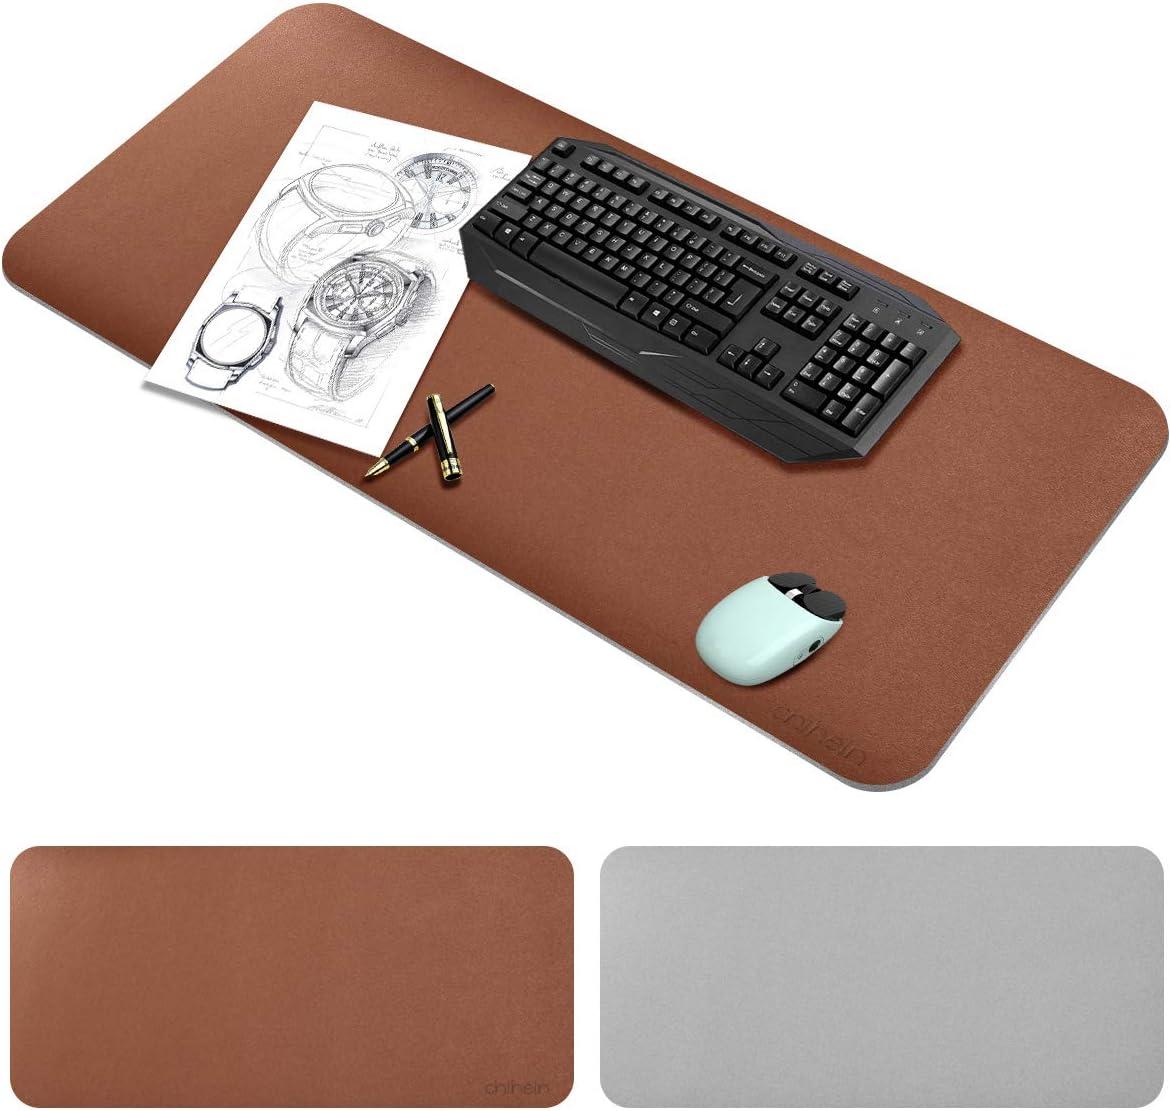 chihein dual sided pu leather desk pad 115x50cm - desk protector pad desk mat large mouse pad table gaming